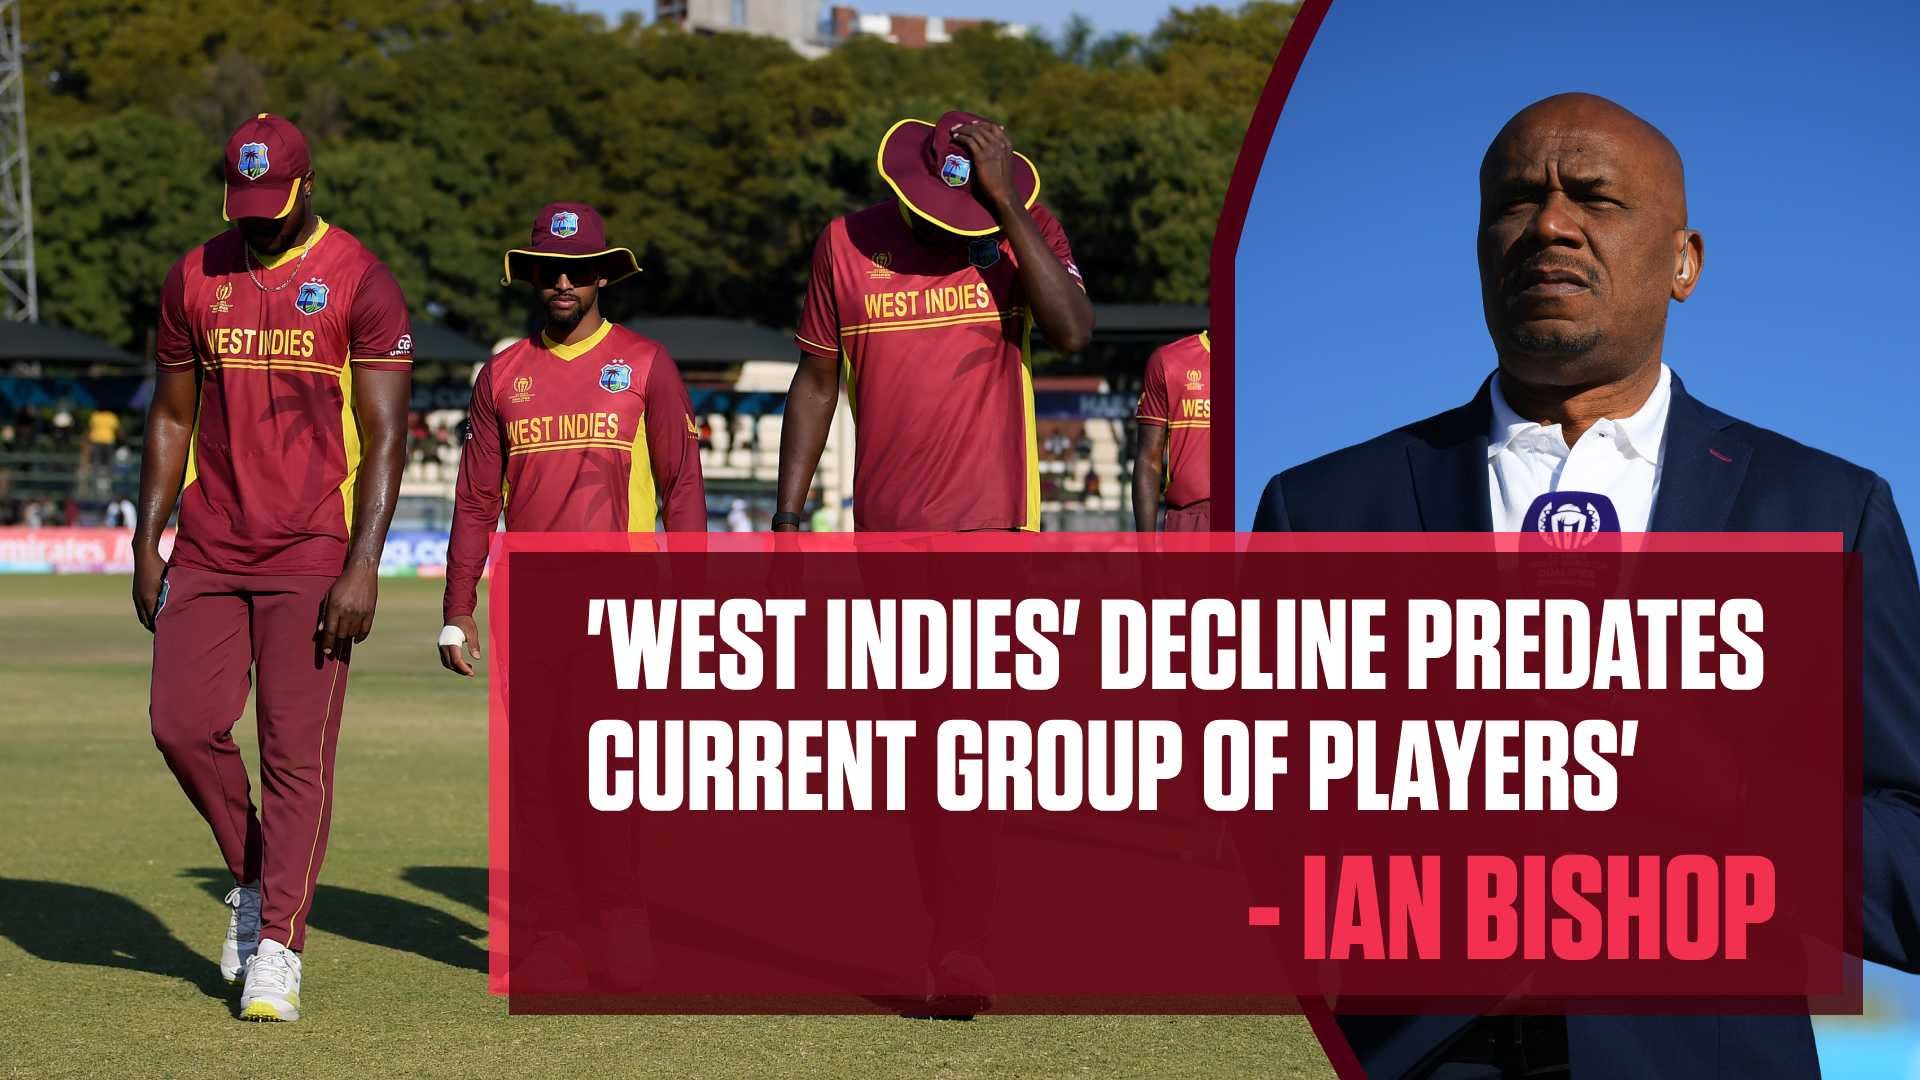 Ian Bishop on WI not making ODI World Cup - Decline pre-dates this